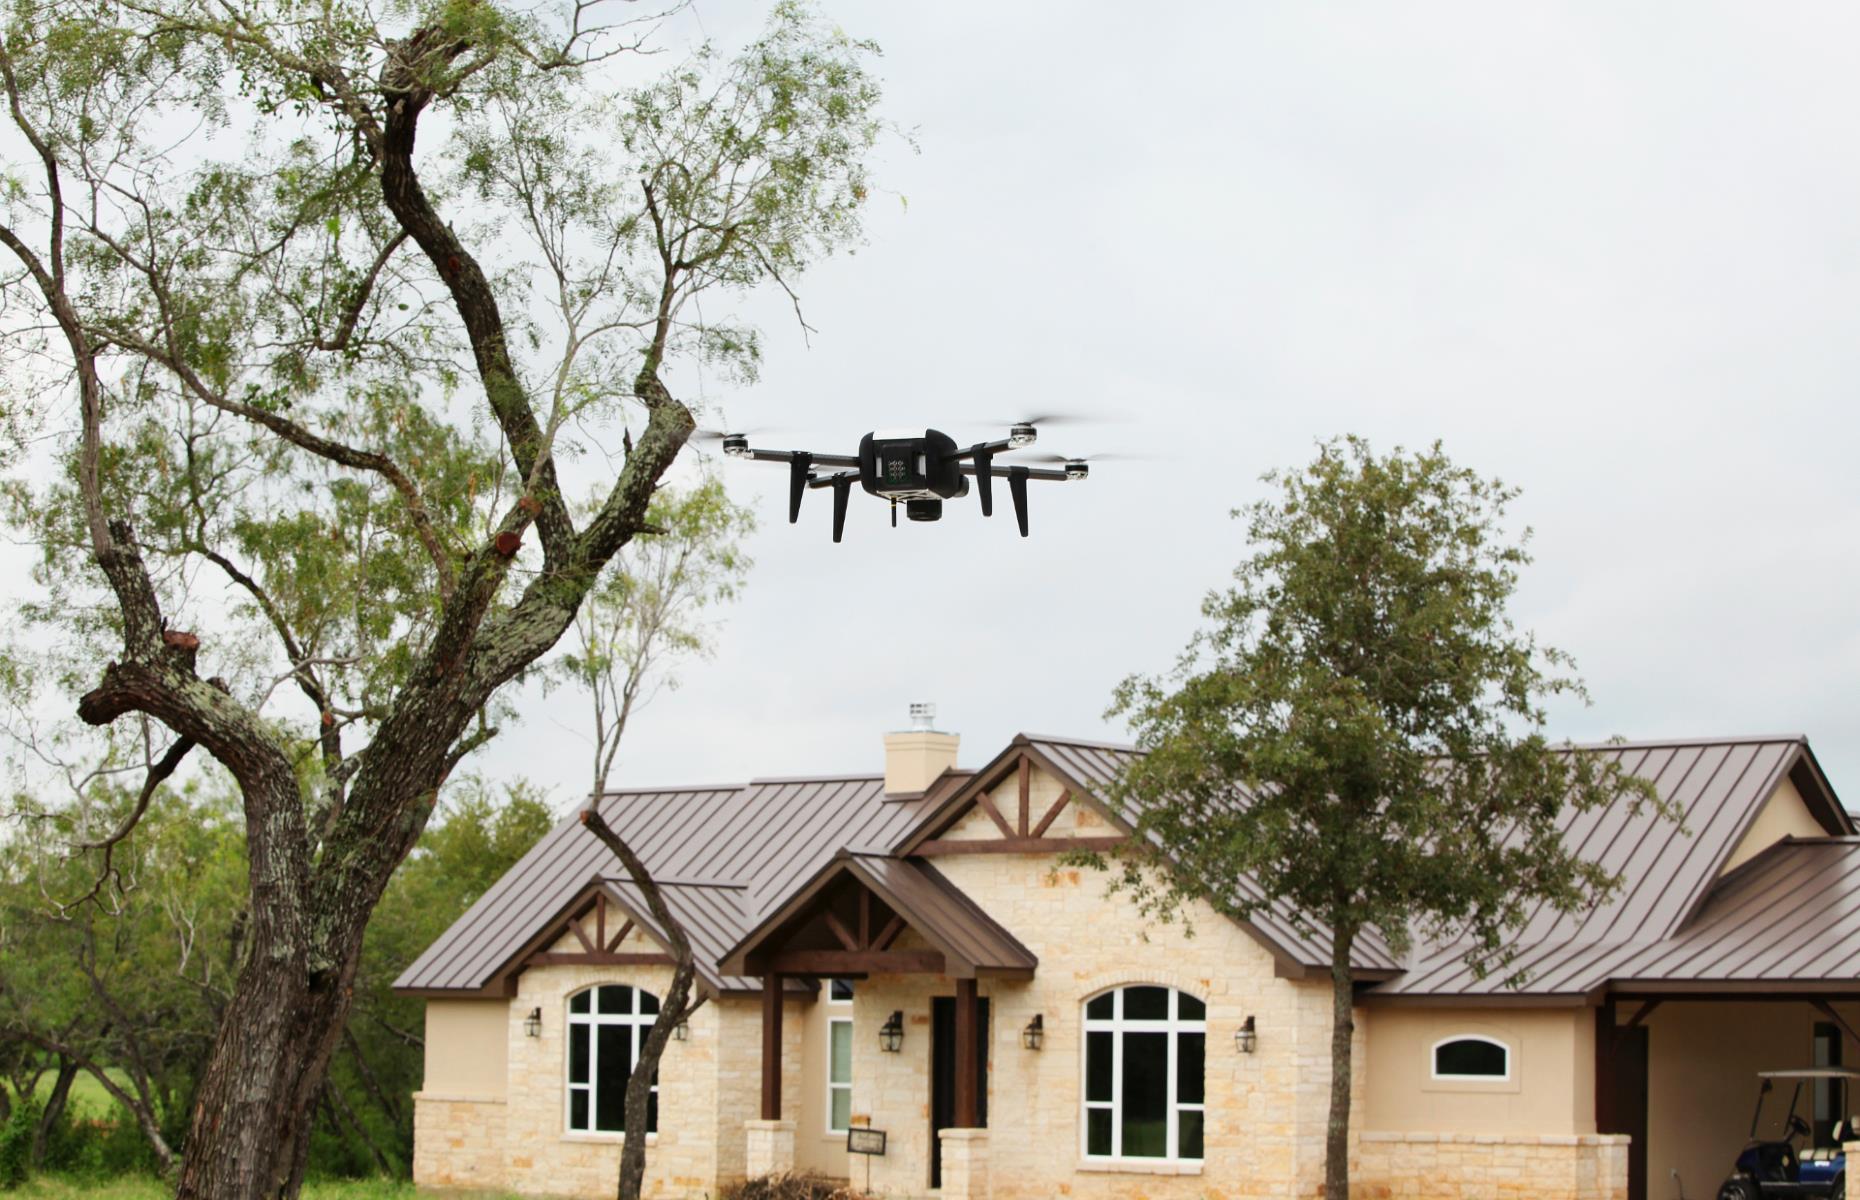 Drone duty: insurance inspections after natural disasters